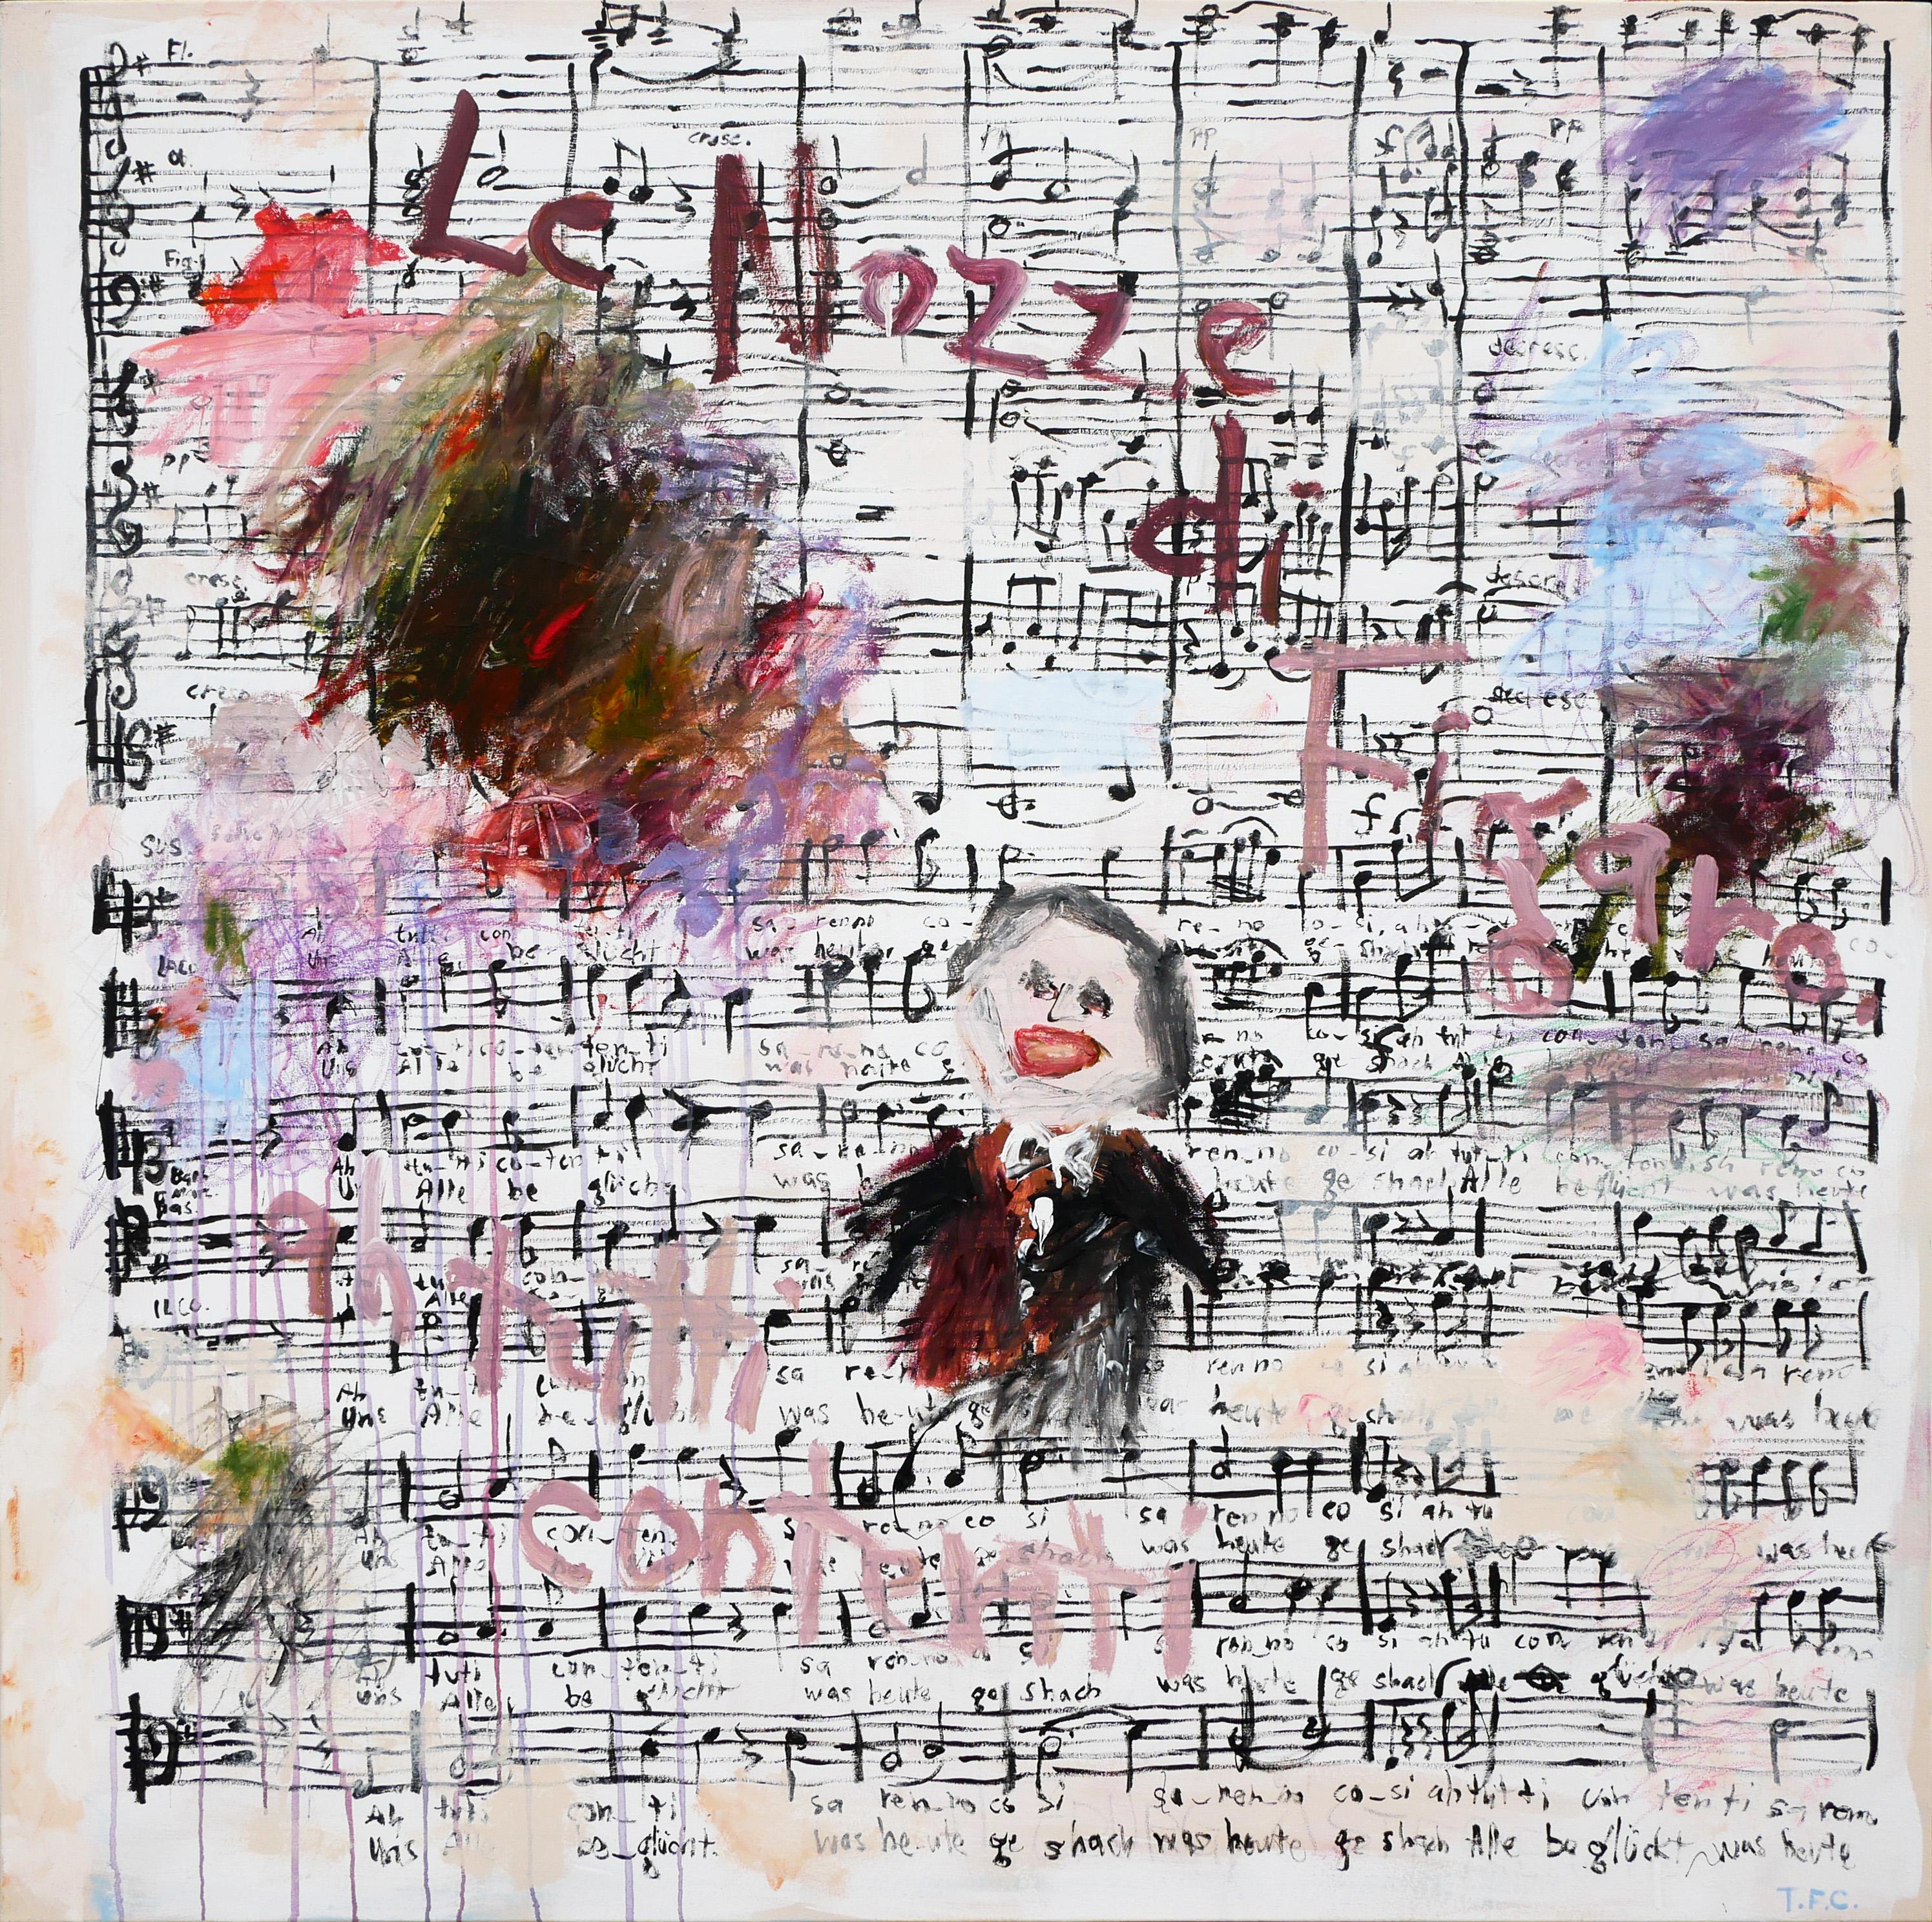 Tyler Casey Figurative Painting - "Le Nozze di Figaro" Contemporary Abstract Pop Art Painting of Sheet Music